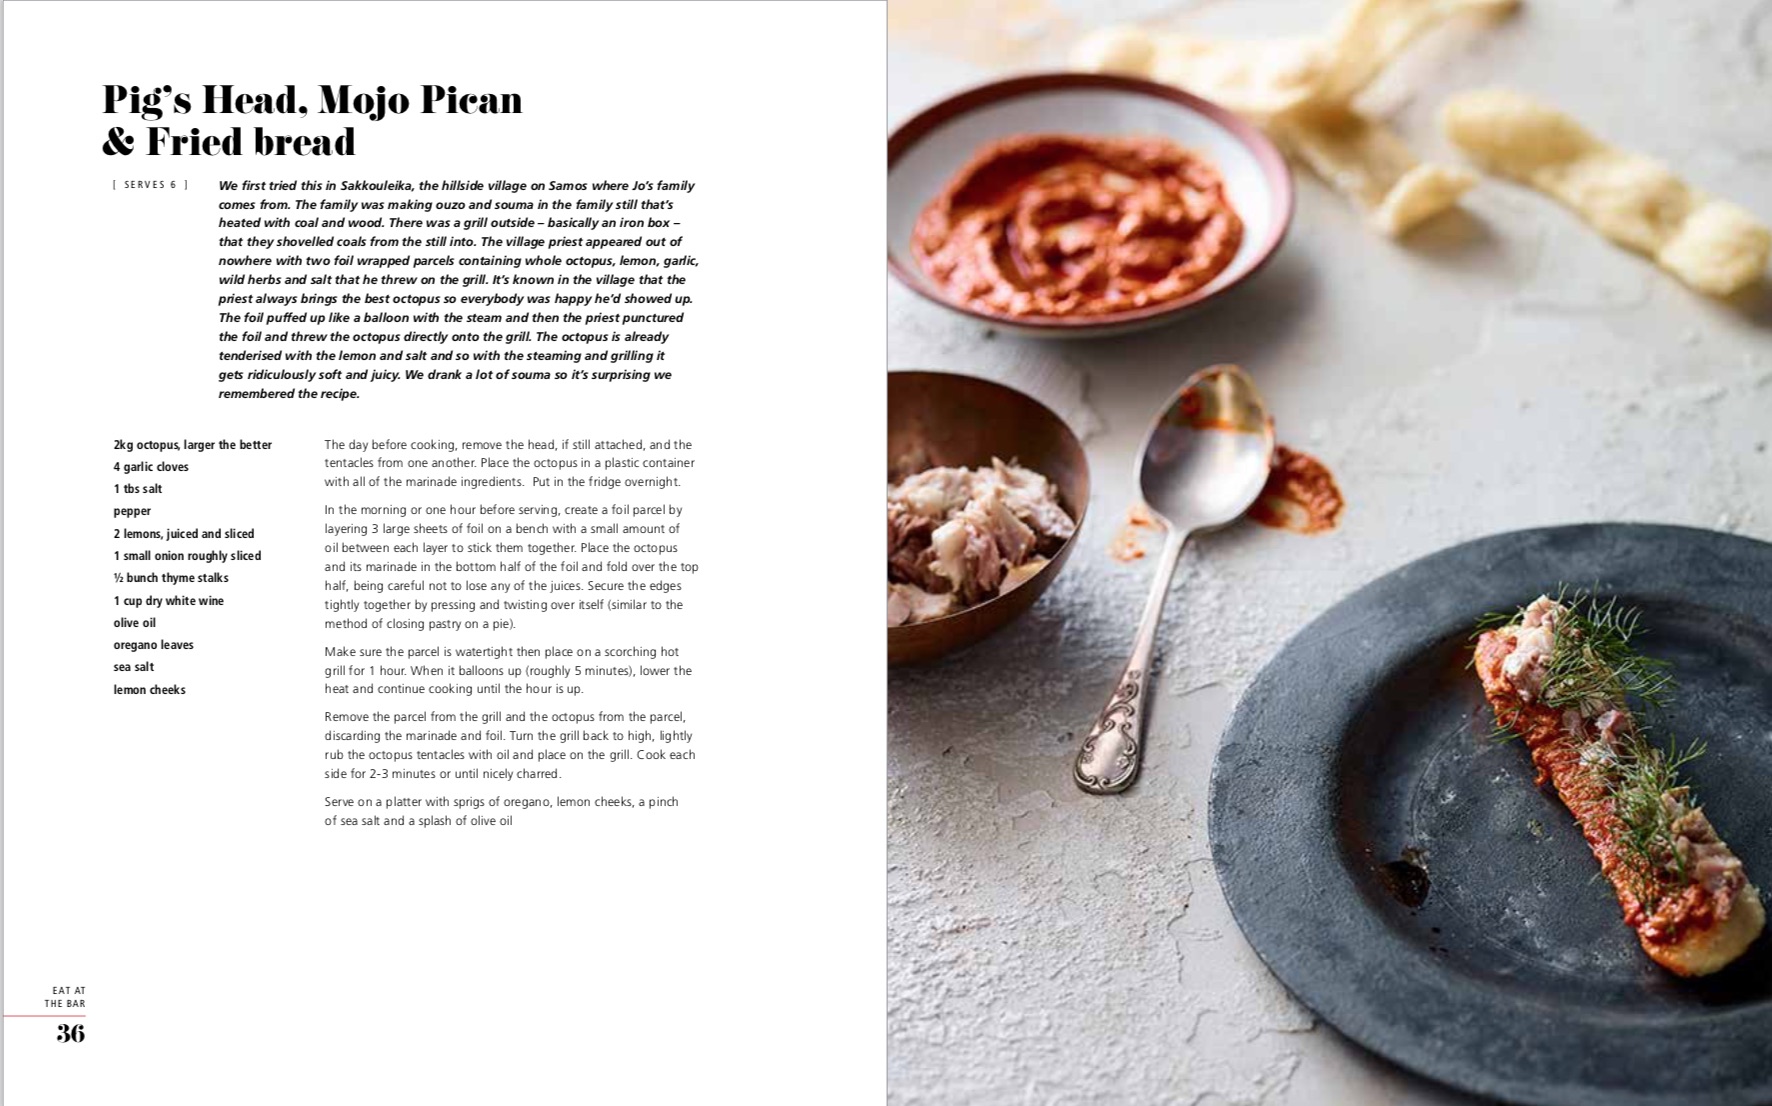 By Jo Gamvros and Matt McConnell from Eat at the Bar: Recipes Inspired by Travels in Spain, Portugal and Beyond copyright Hardie Grant Books 2018